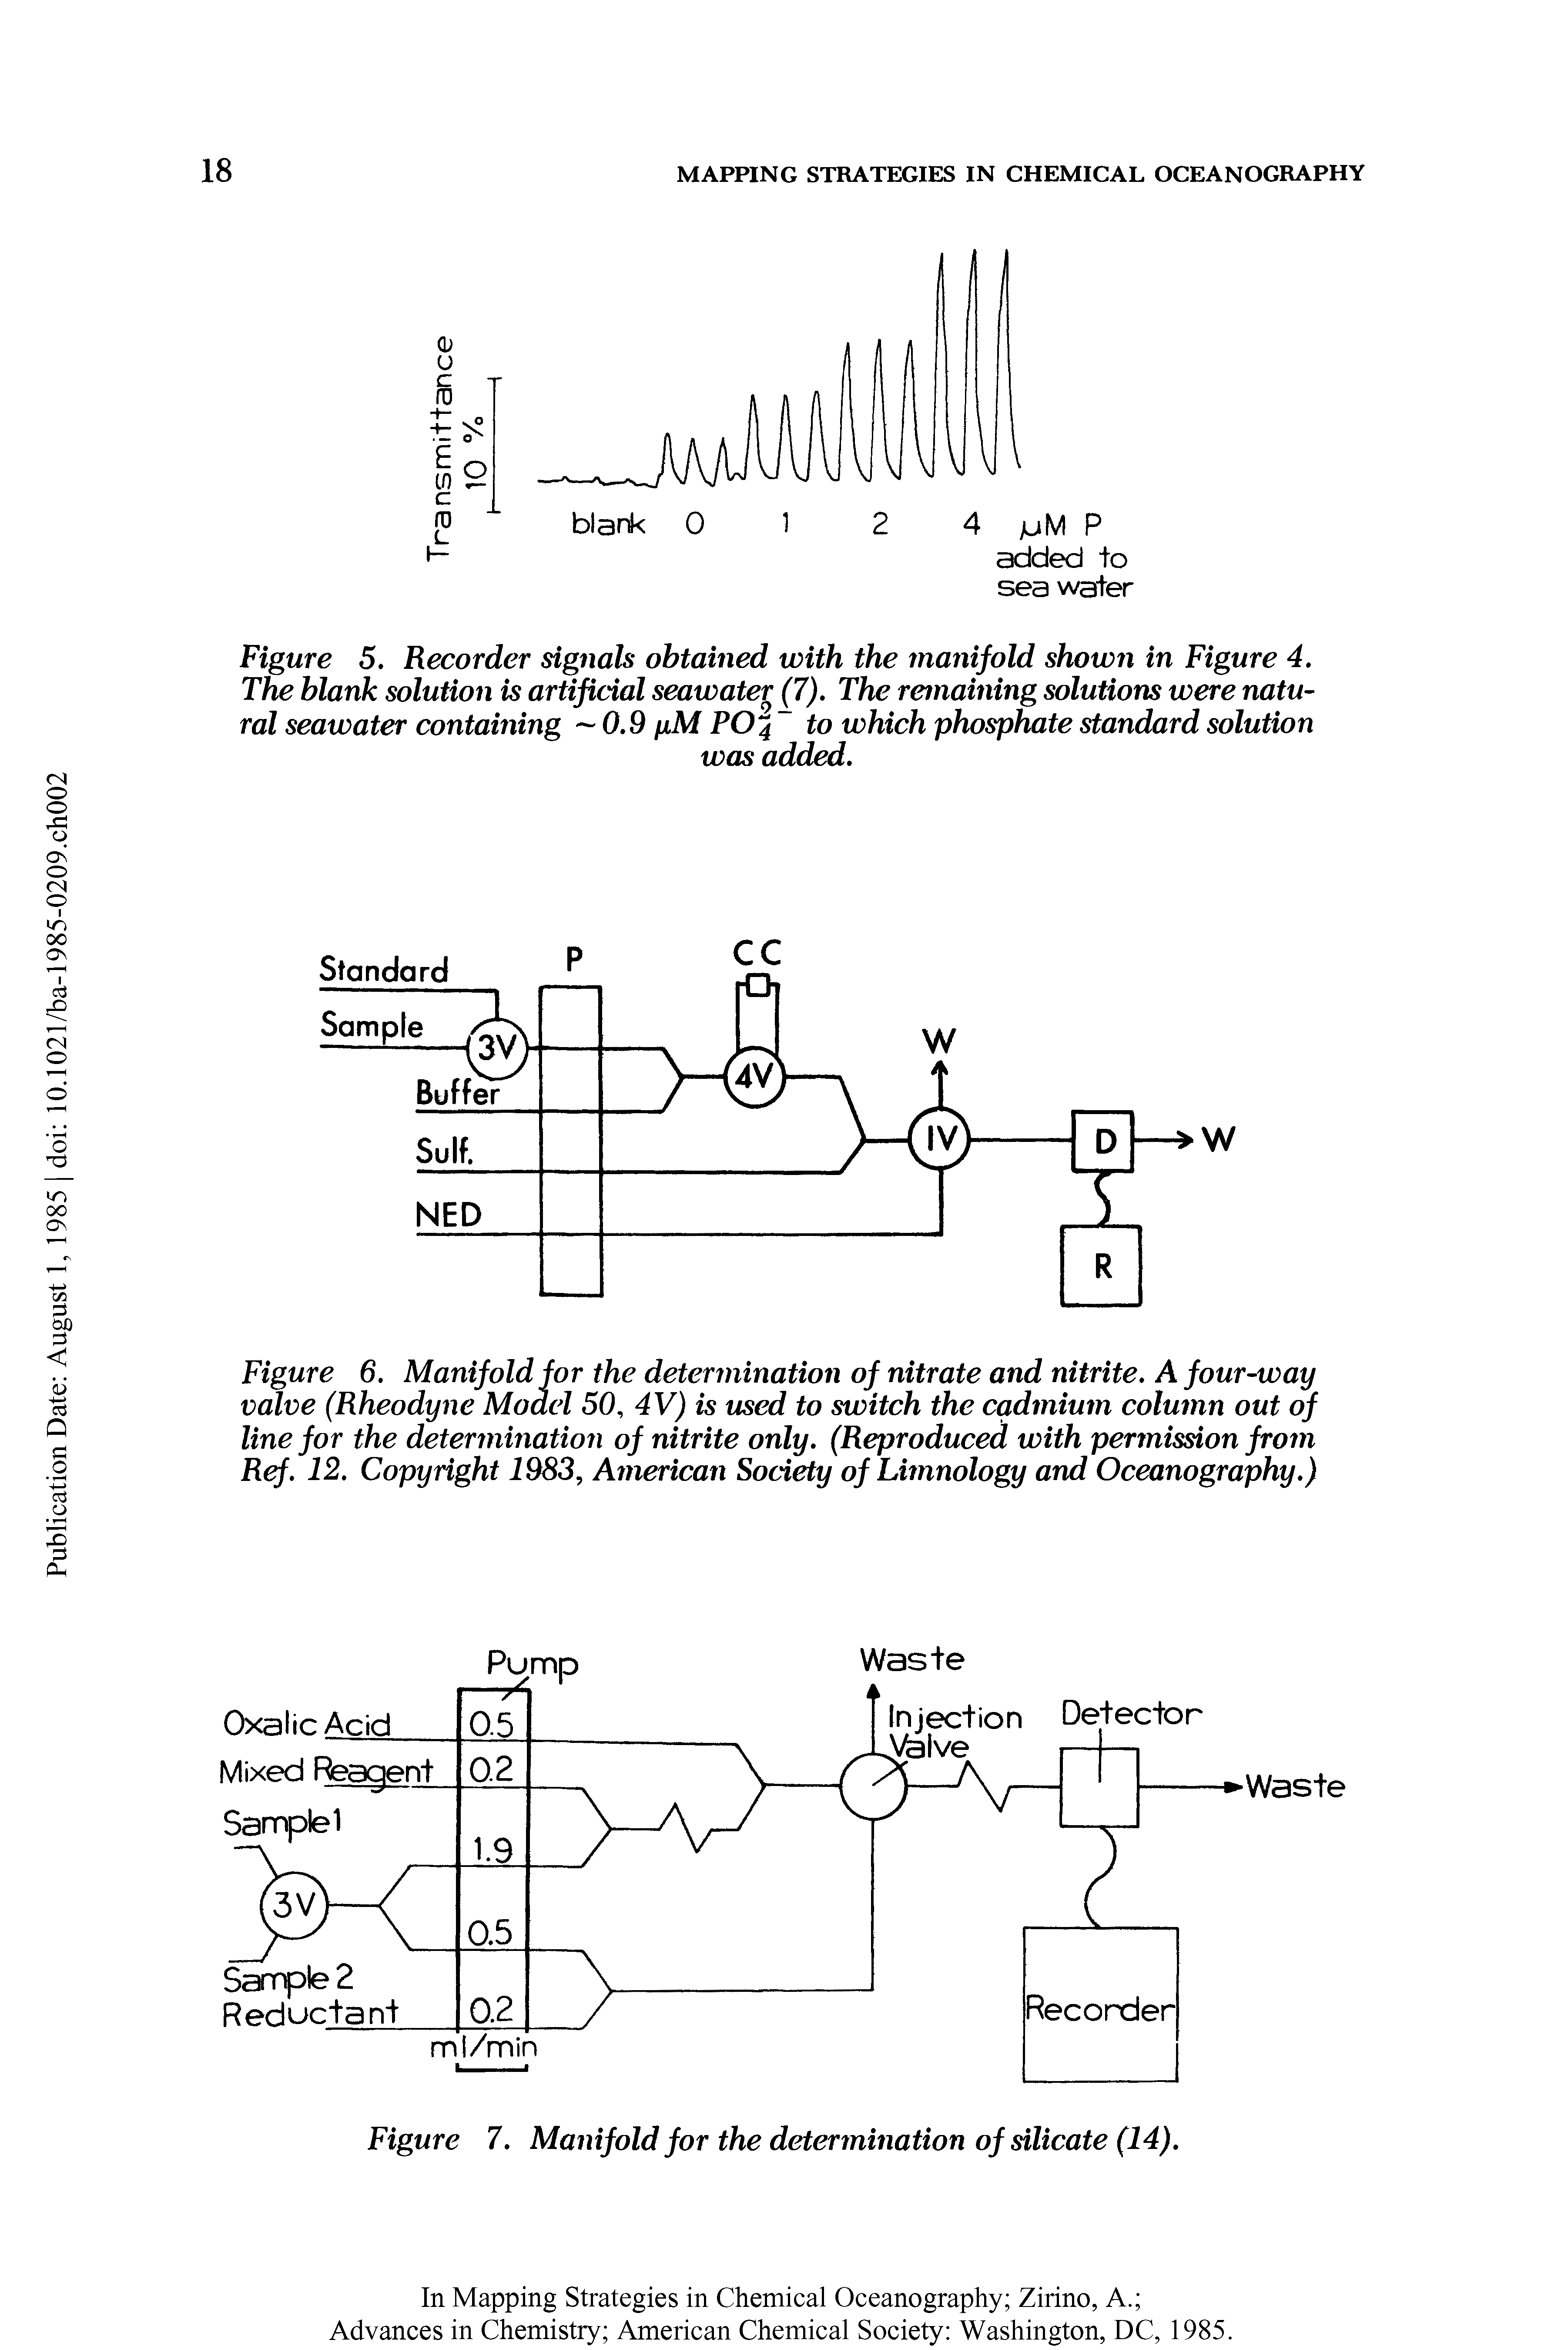 Figure 5, Recorder signals obtained with the manifold shown in Figure 4. The blank solution is artificial seawate (7). The remaining solutions were natural seawater containing —0.9 /xM PO4 to which phosphate standard solution...